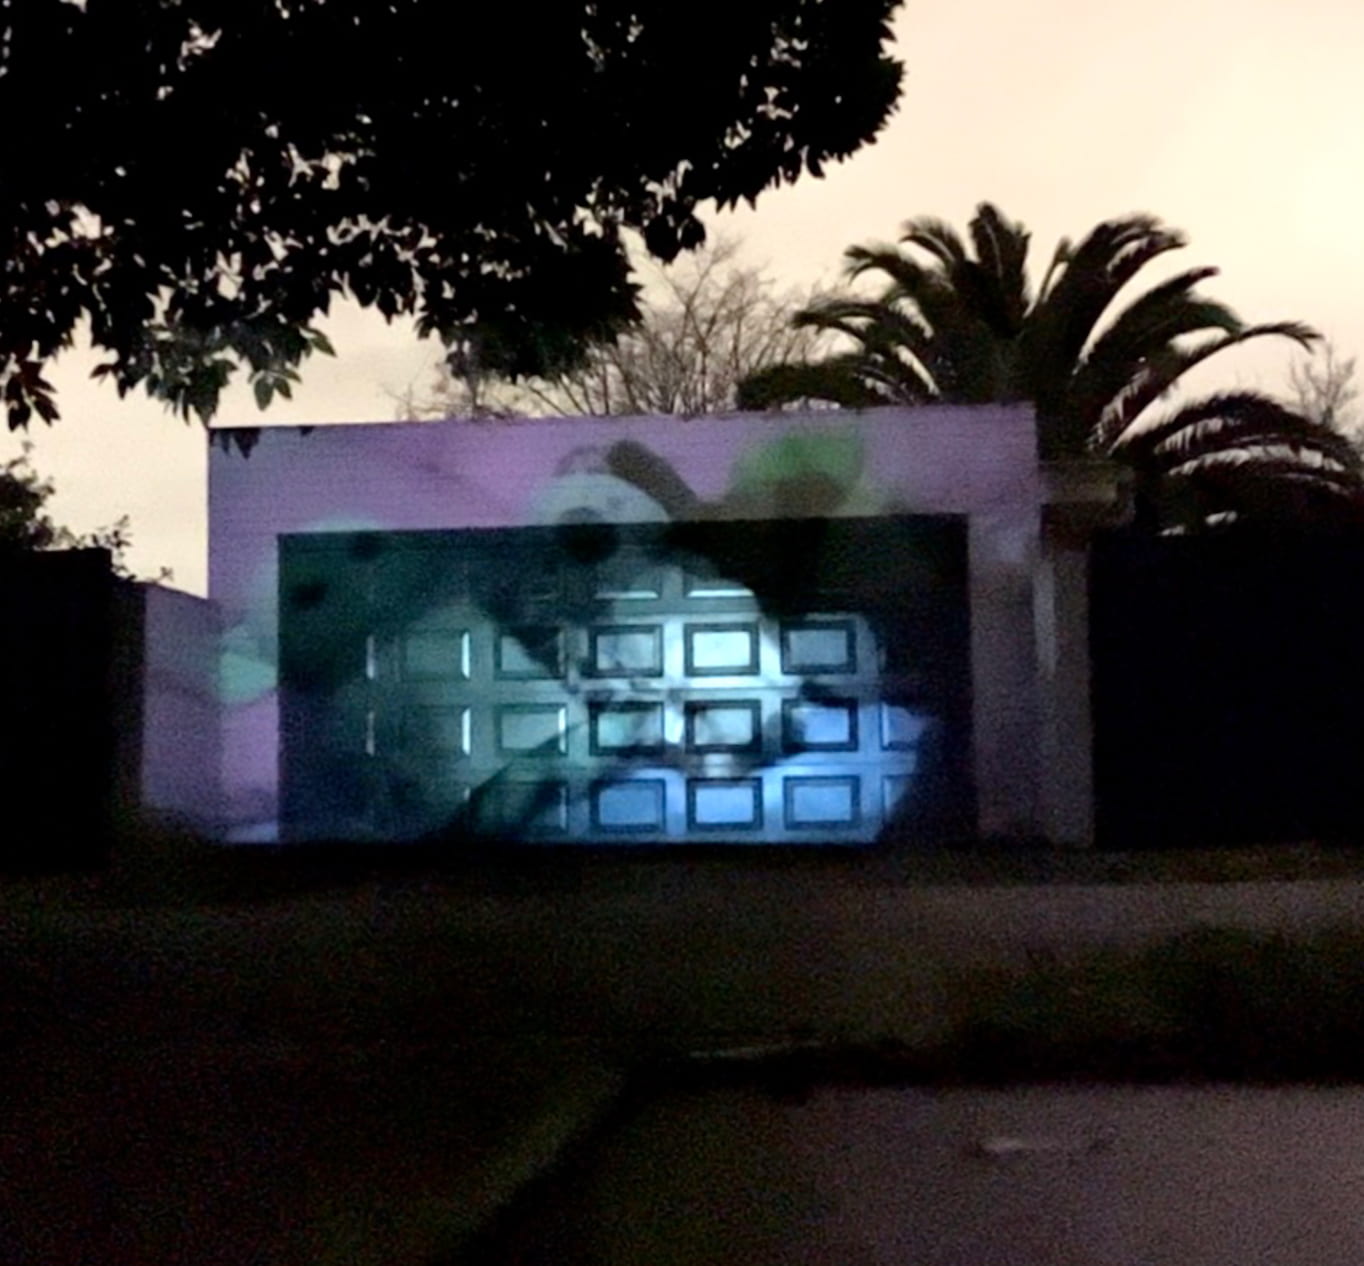 A photo of a bed is projected over a garage door.